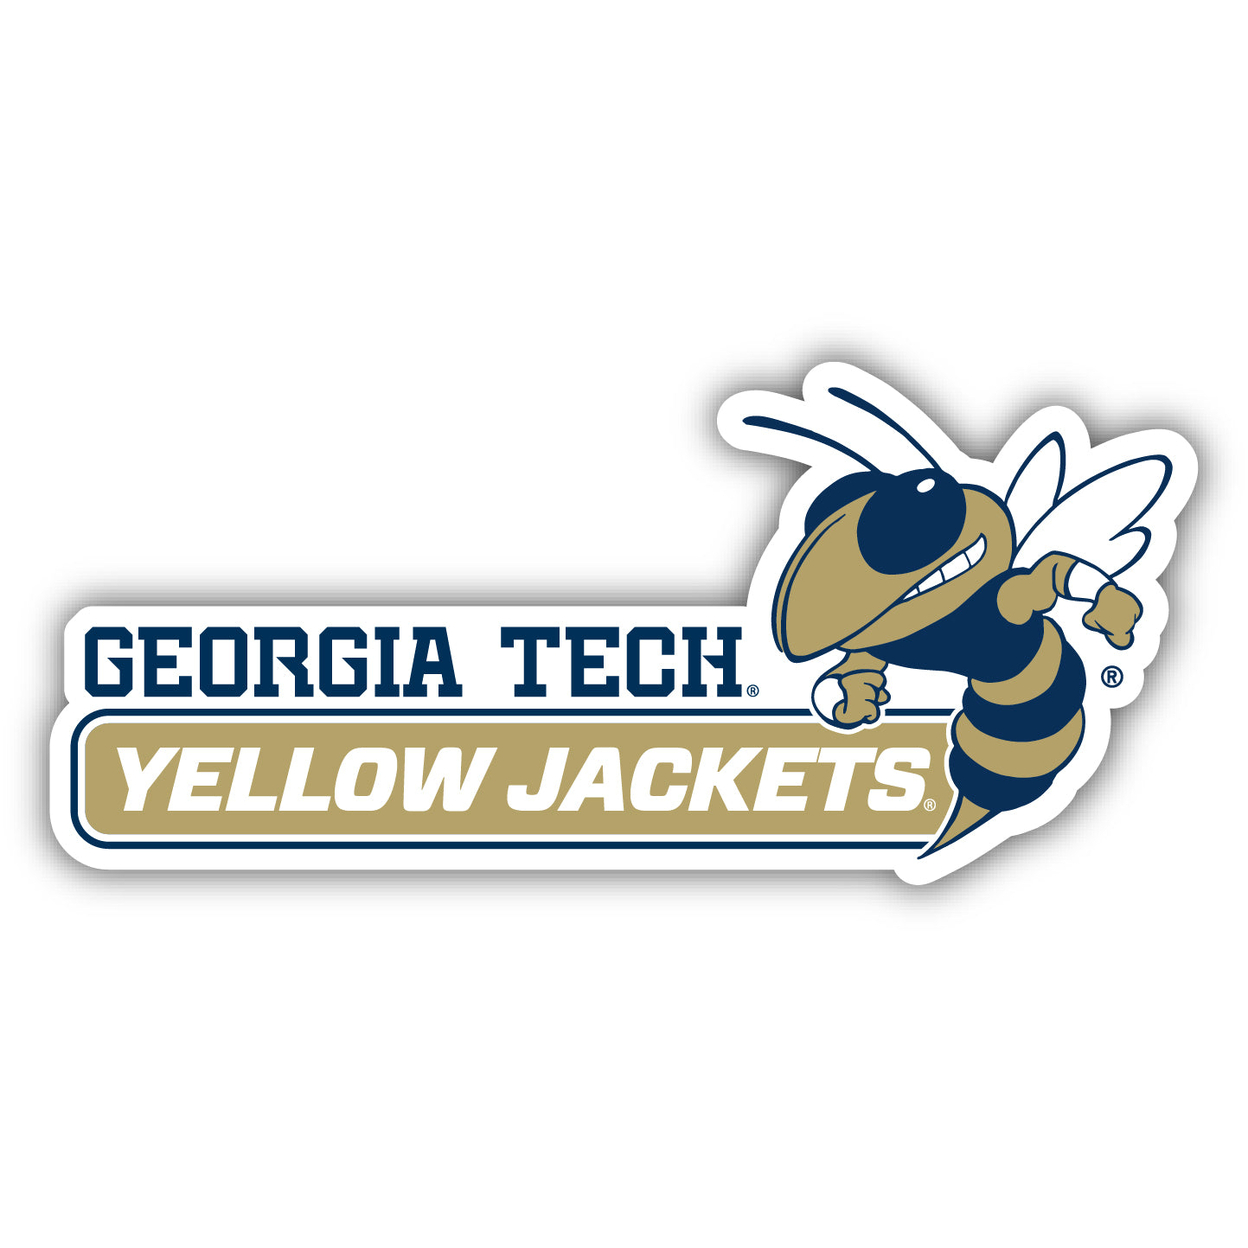 Georgia Tech Yellow Jackets 4 Inch Wide Colorful Vinyl Decal Sticker